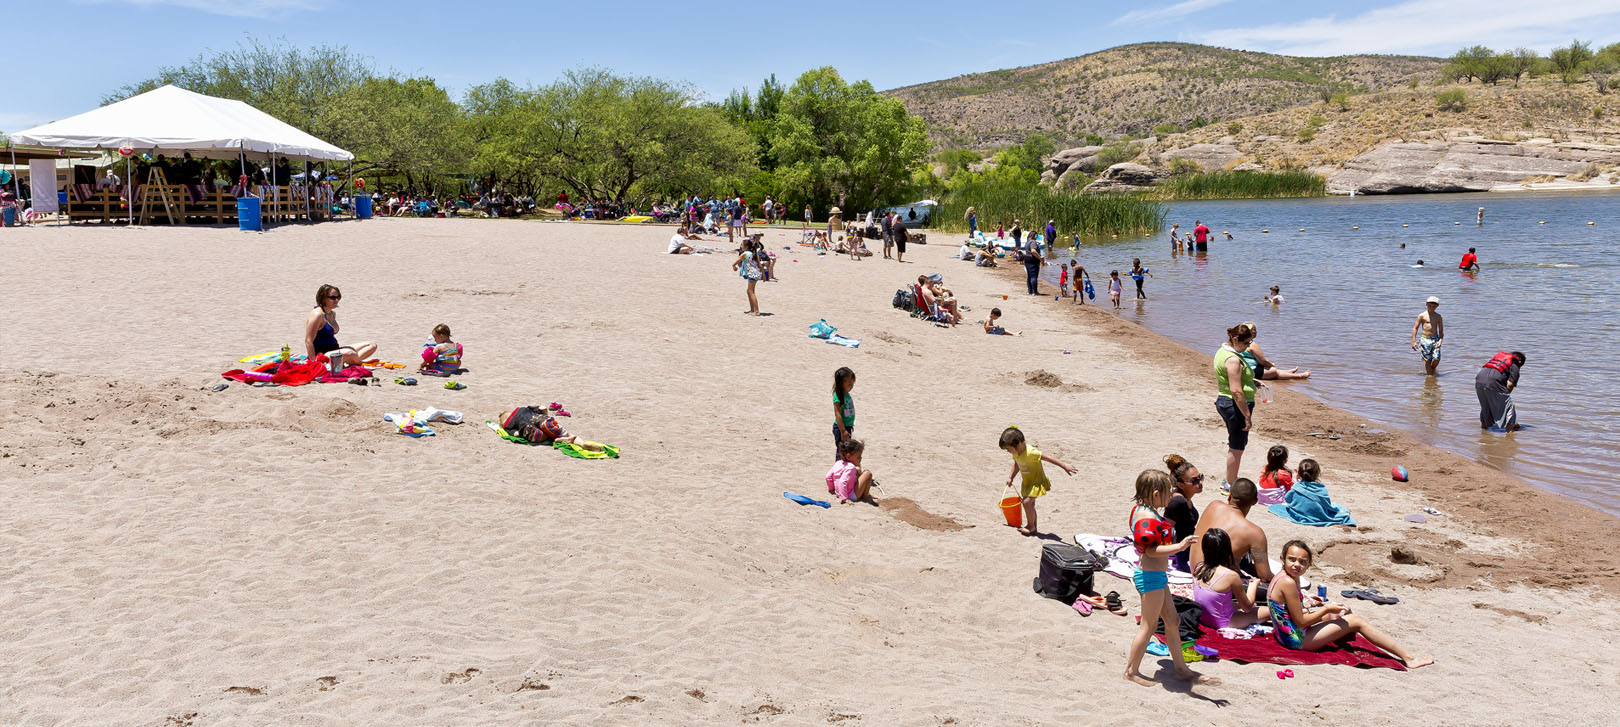 People relax on the beach and in the water at Patagonia Lake State Park